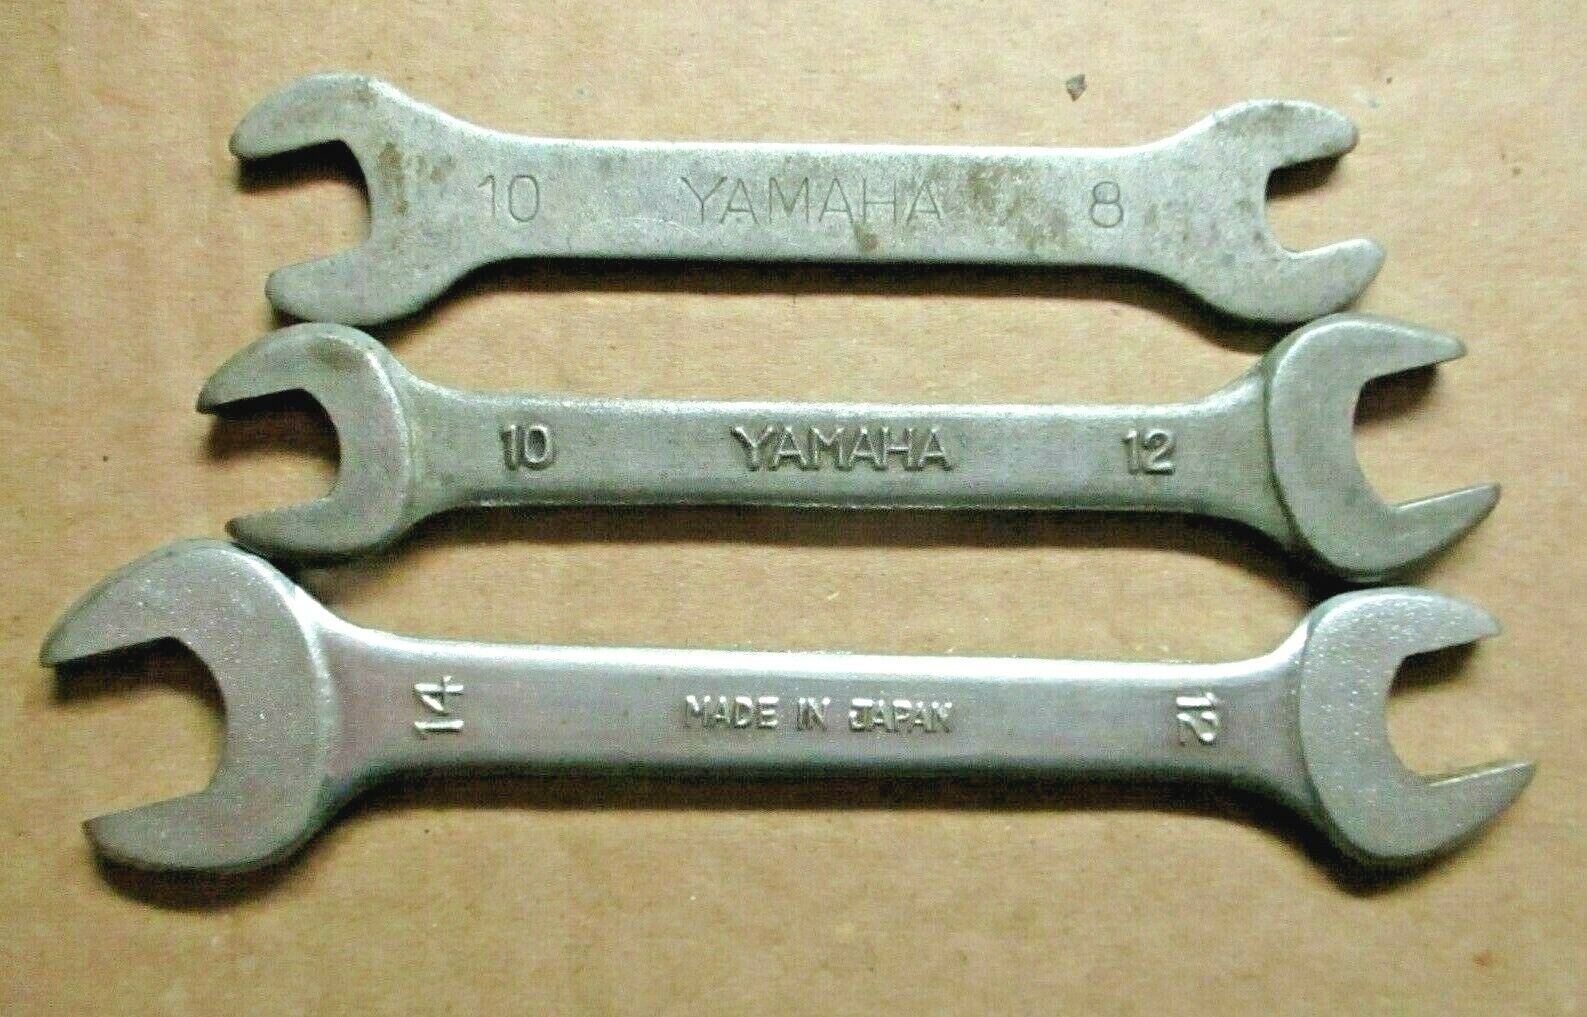 Yamaha FS1 SS50 Japan 1975 Wrench Set 3 Metric Open End Wrenches 8 10 12 14mm